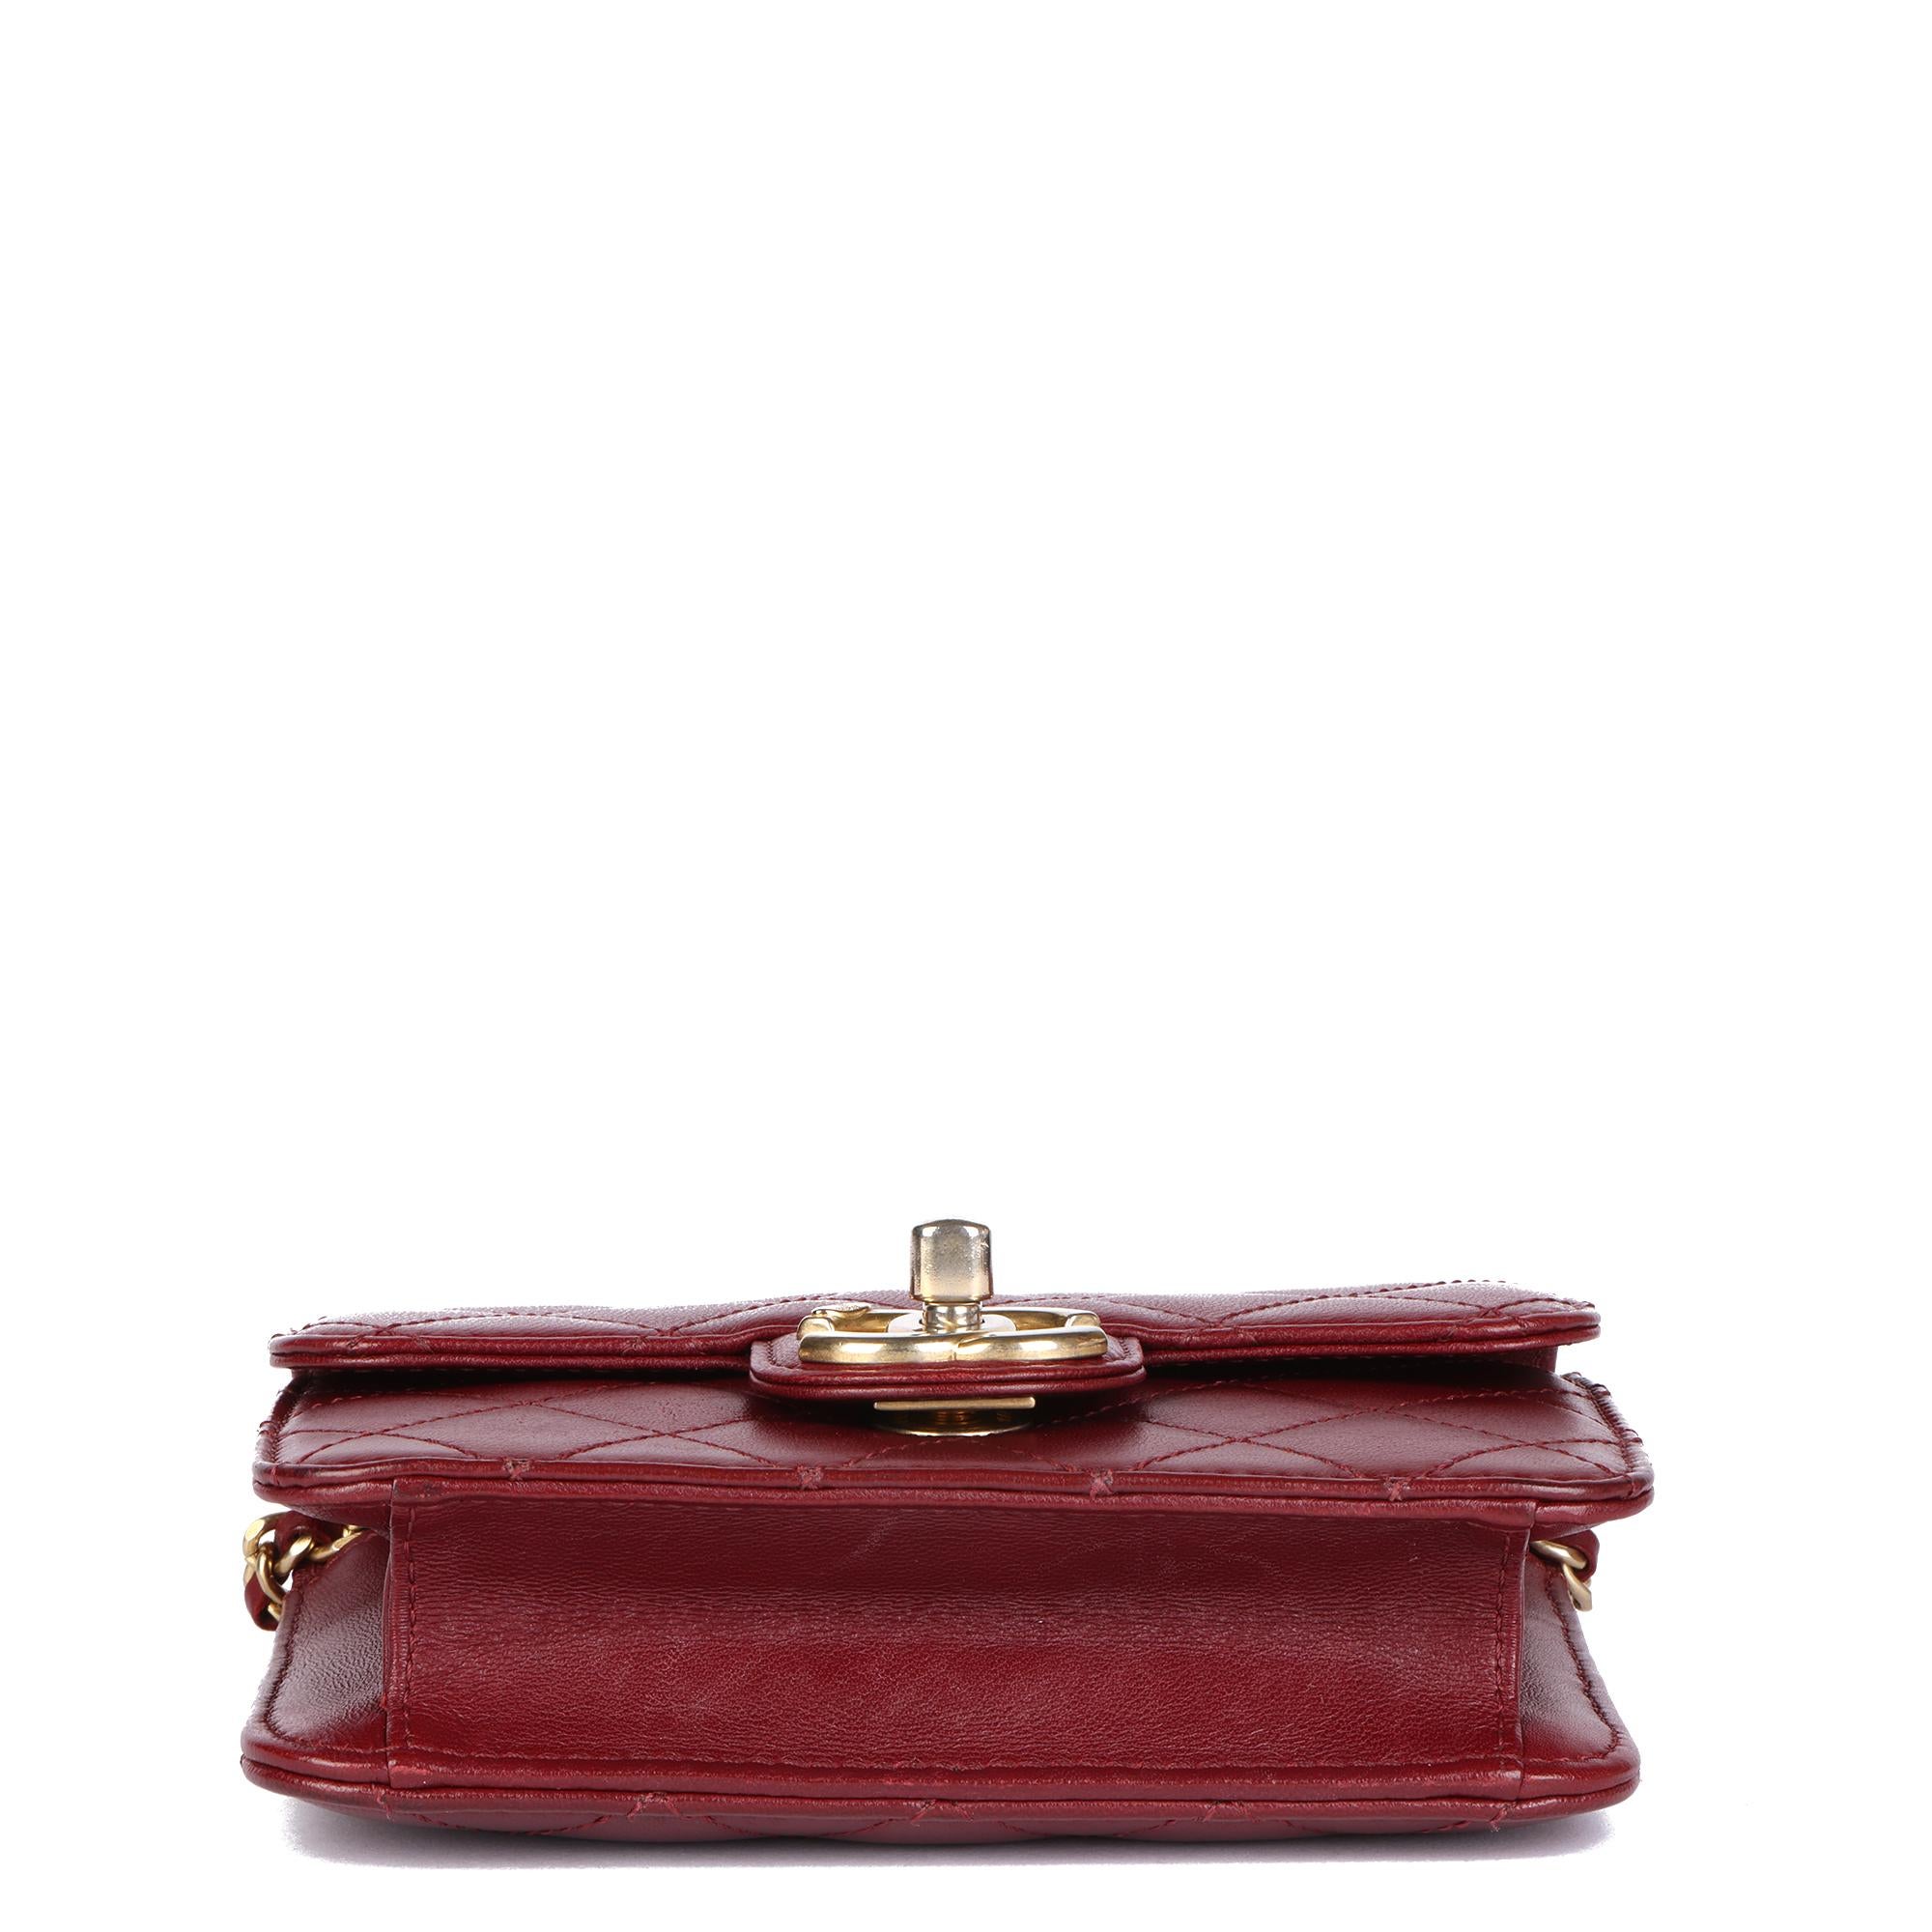 CHANEL Burgundy Quilted Lambskin Mini Flap Bag In Good Condition For Sale In Bishop's Stortford, Hertfordshire